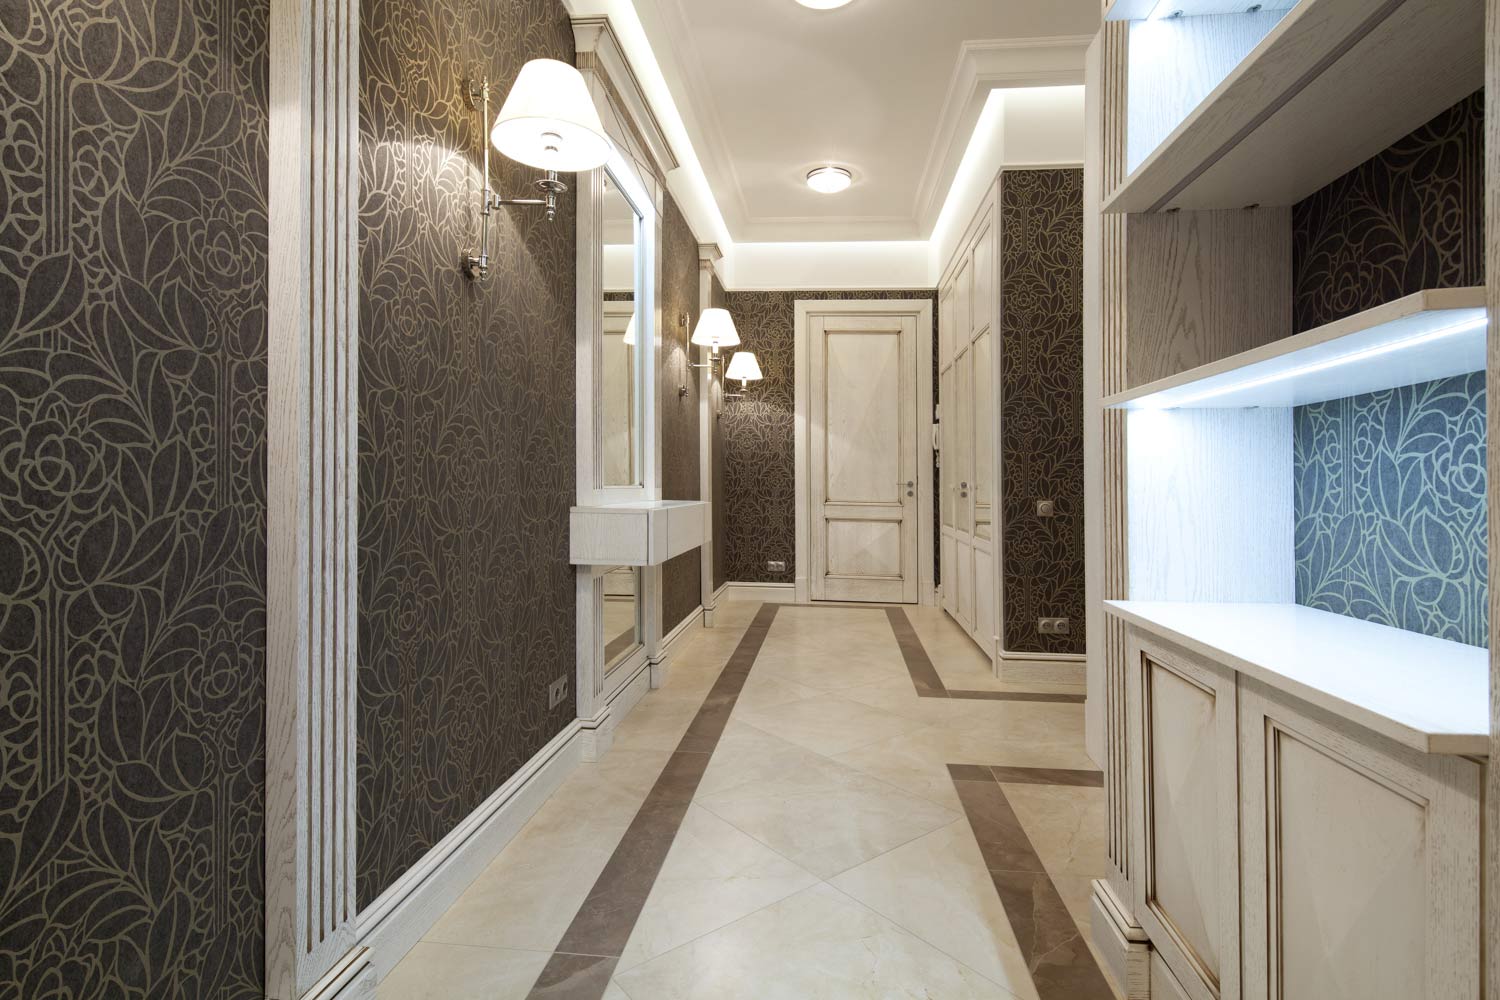 3 Hotel hall with wall lights, wall panelling and marble floors